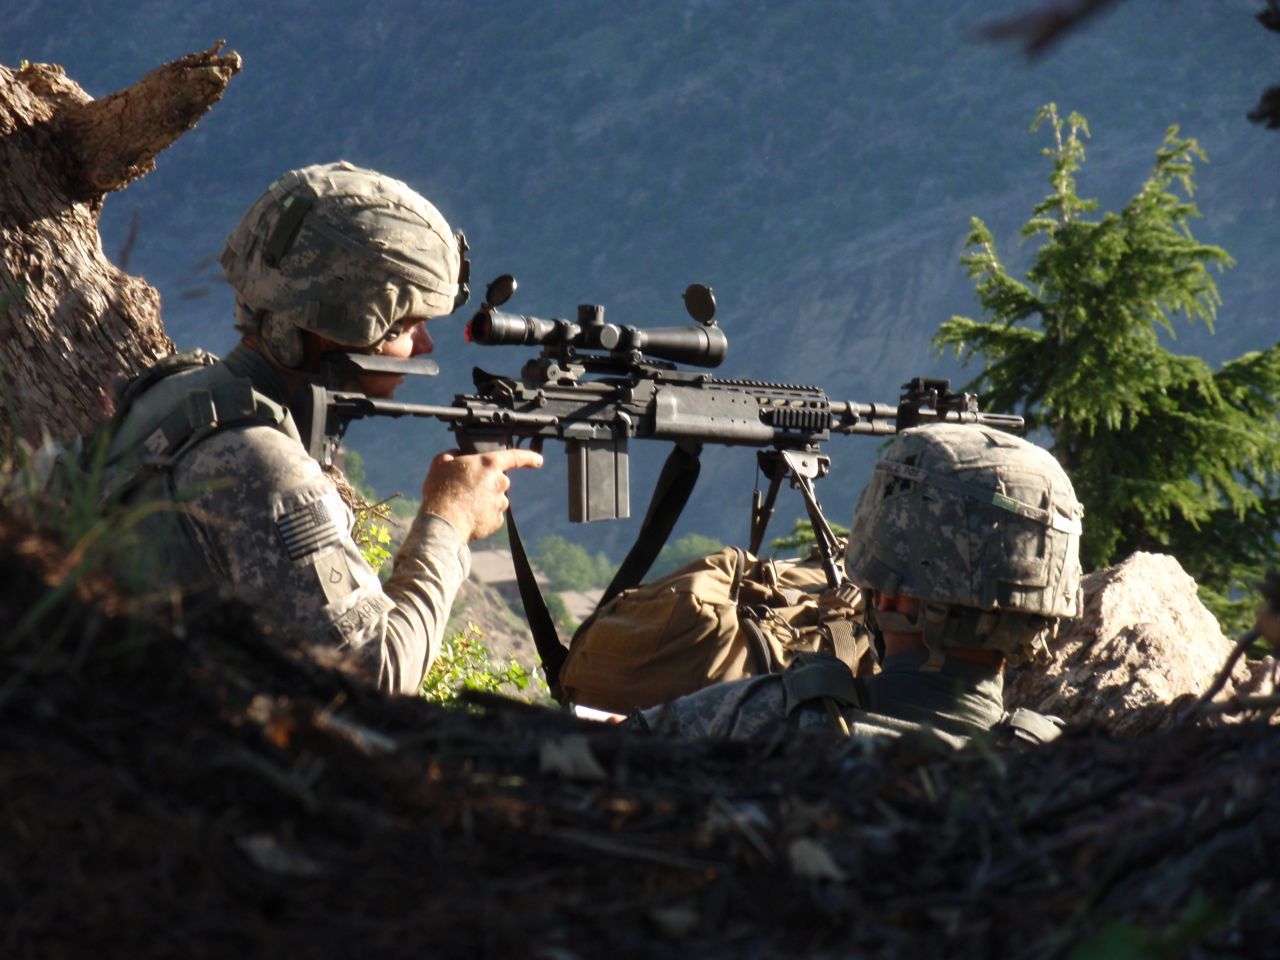 Carter with Spc. John Adams on their first patrol in Afghanistan. They are observing the Village of Kamdesh from a ridgeline between Observation Post Fritsche and the village. 